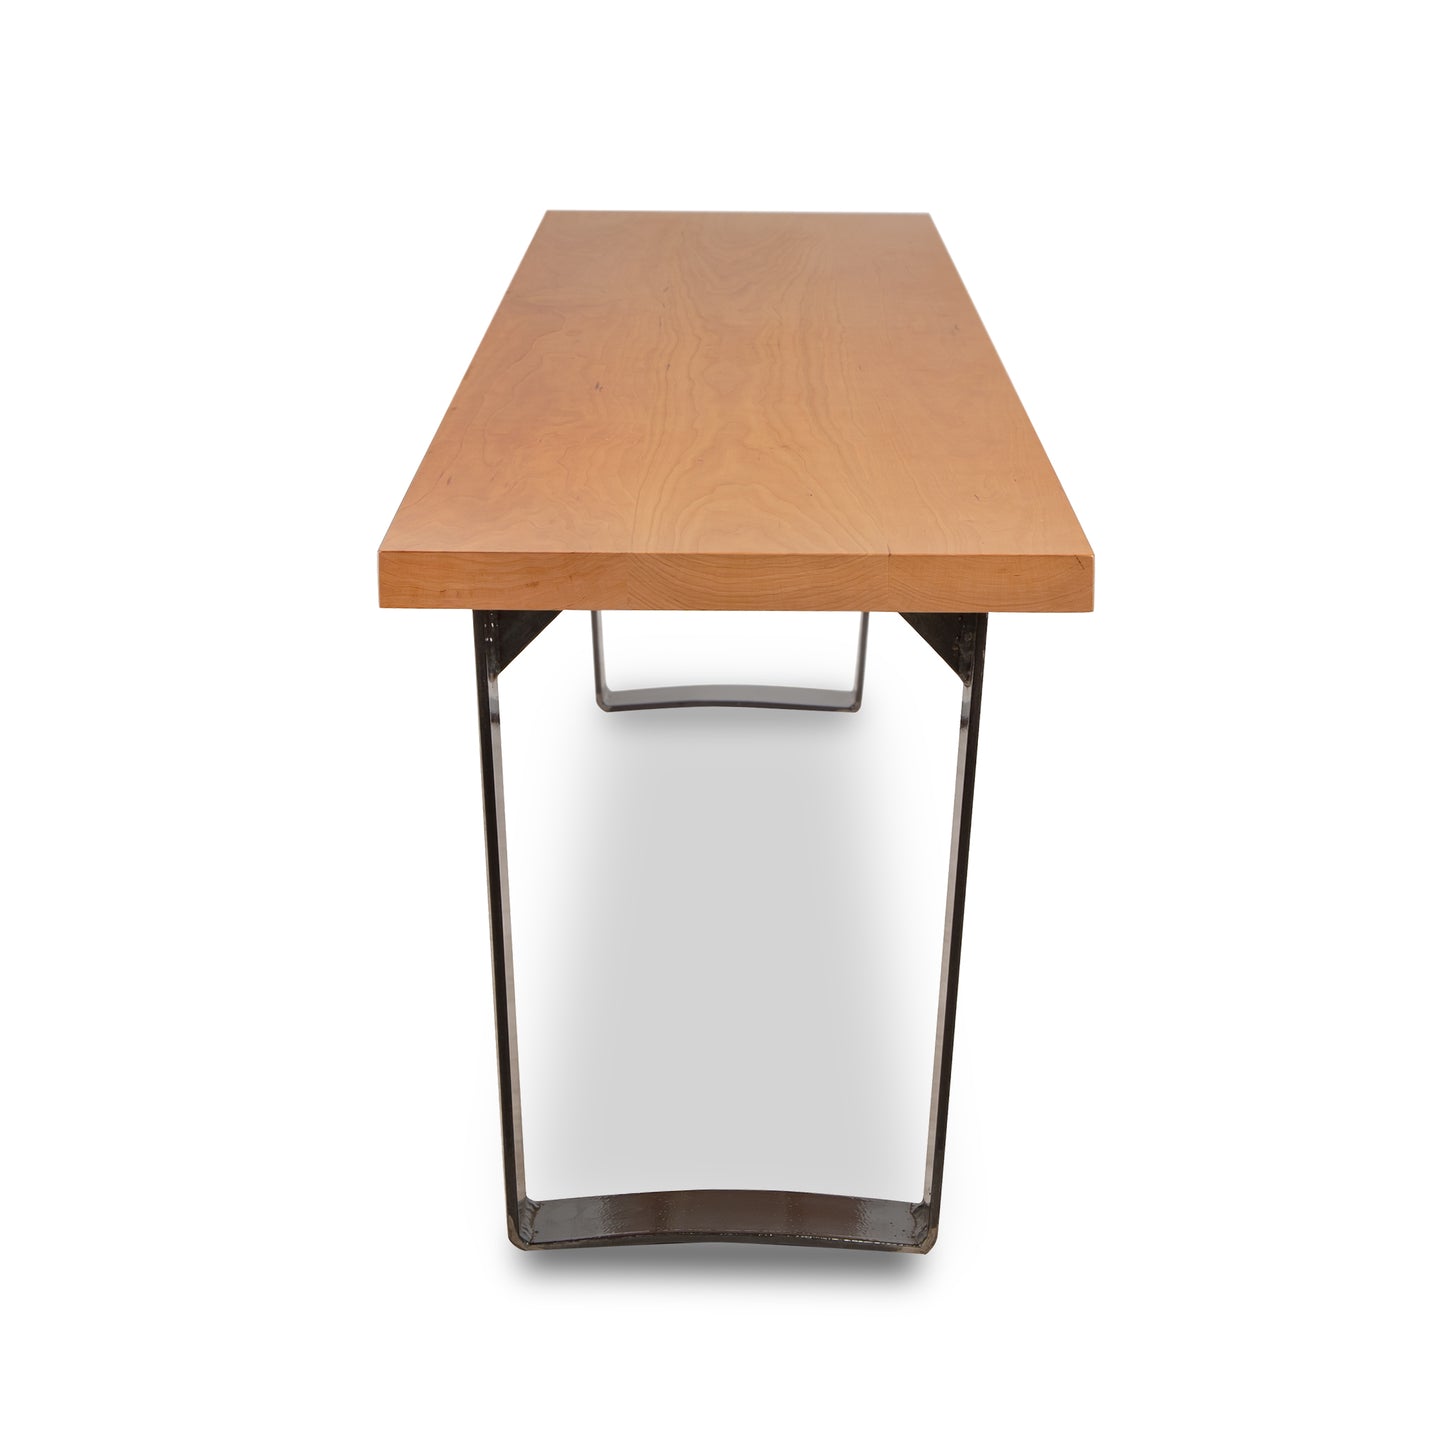 A wooden table with metal legs on a white background.